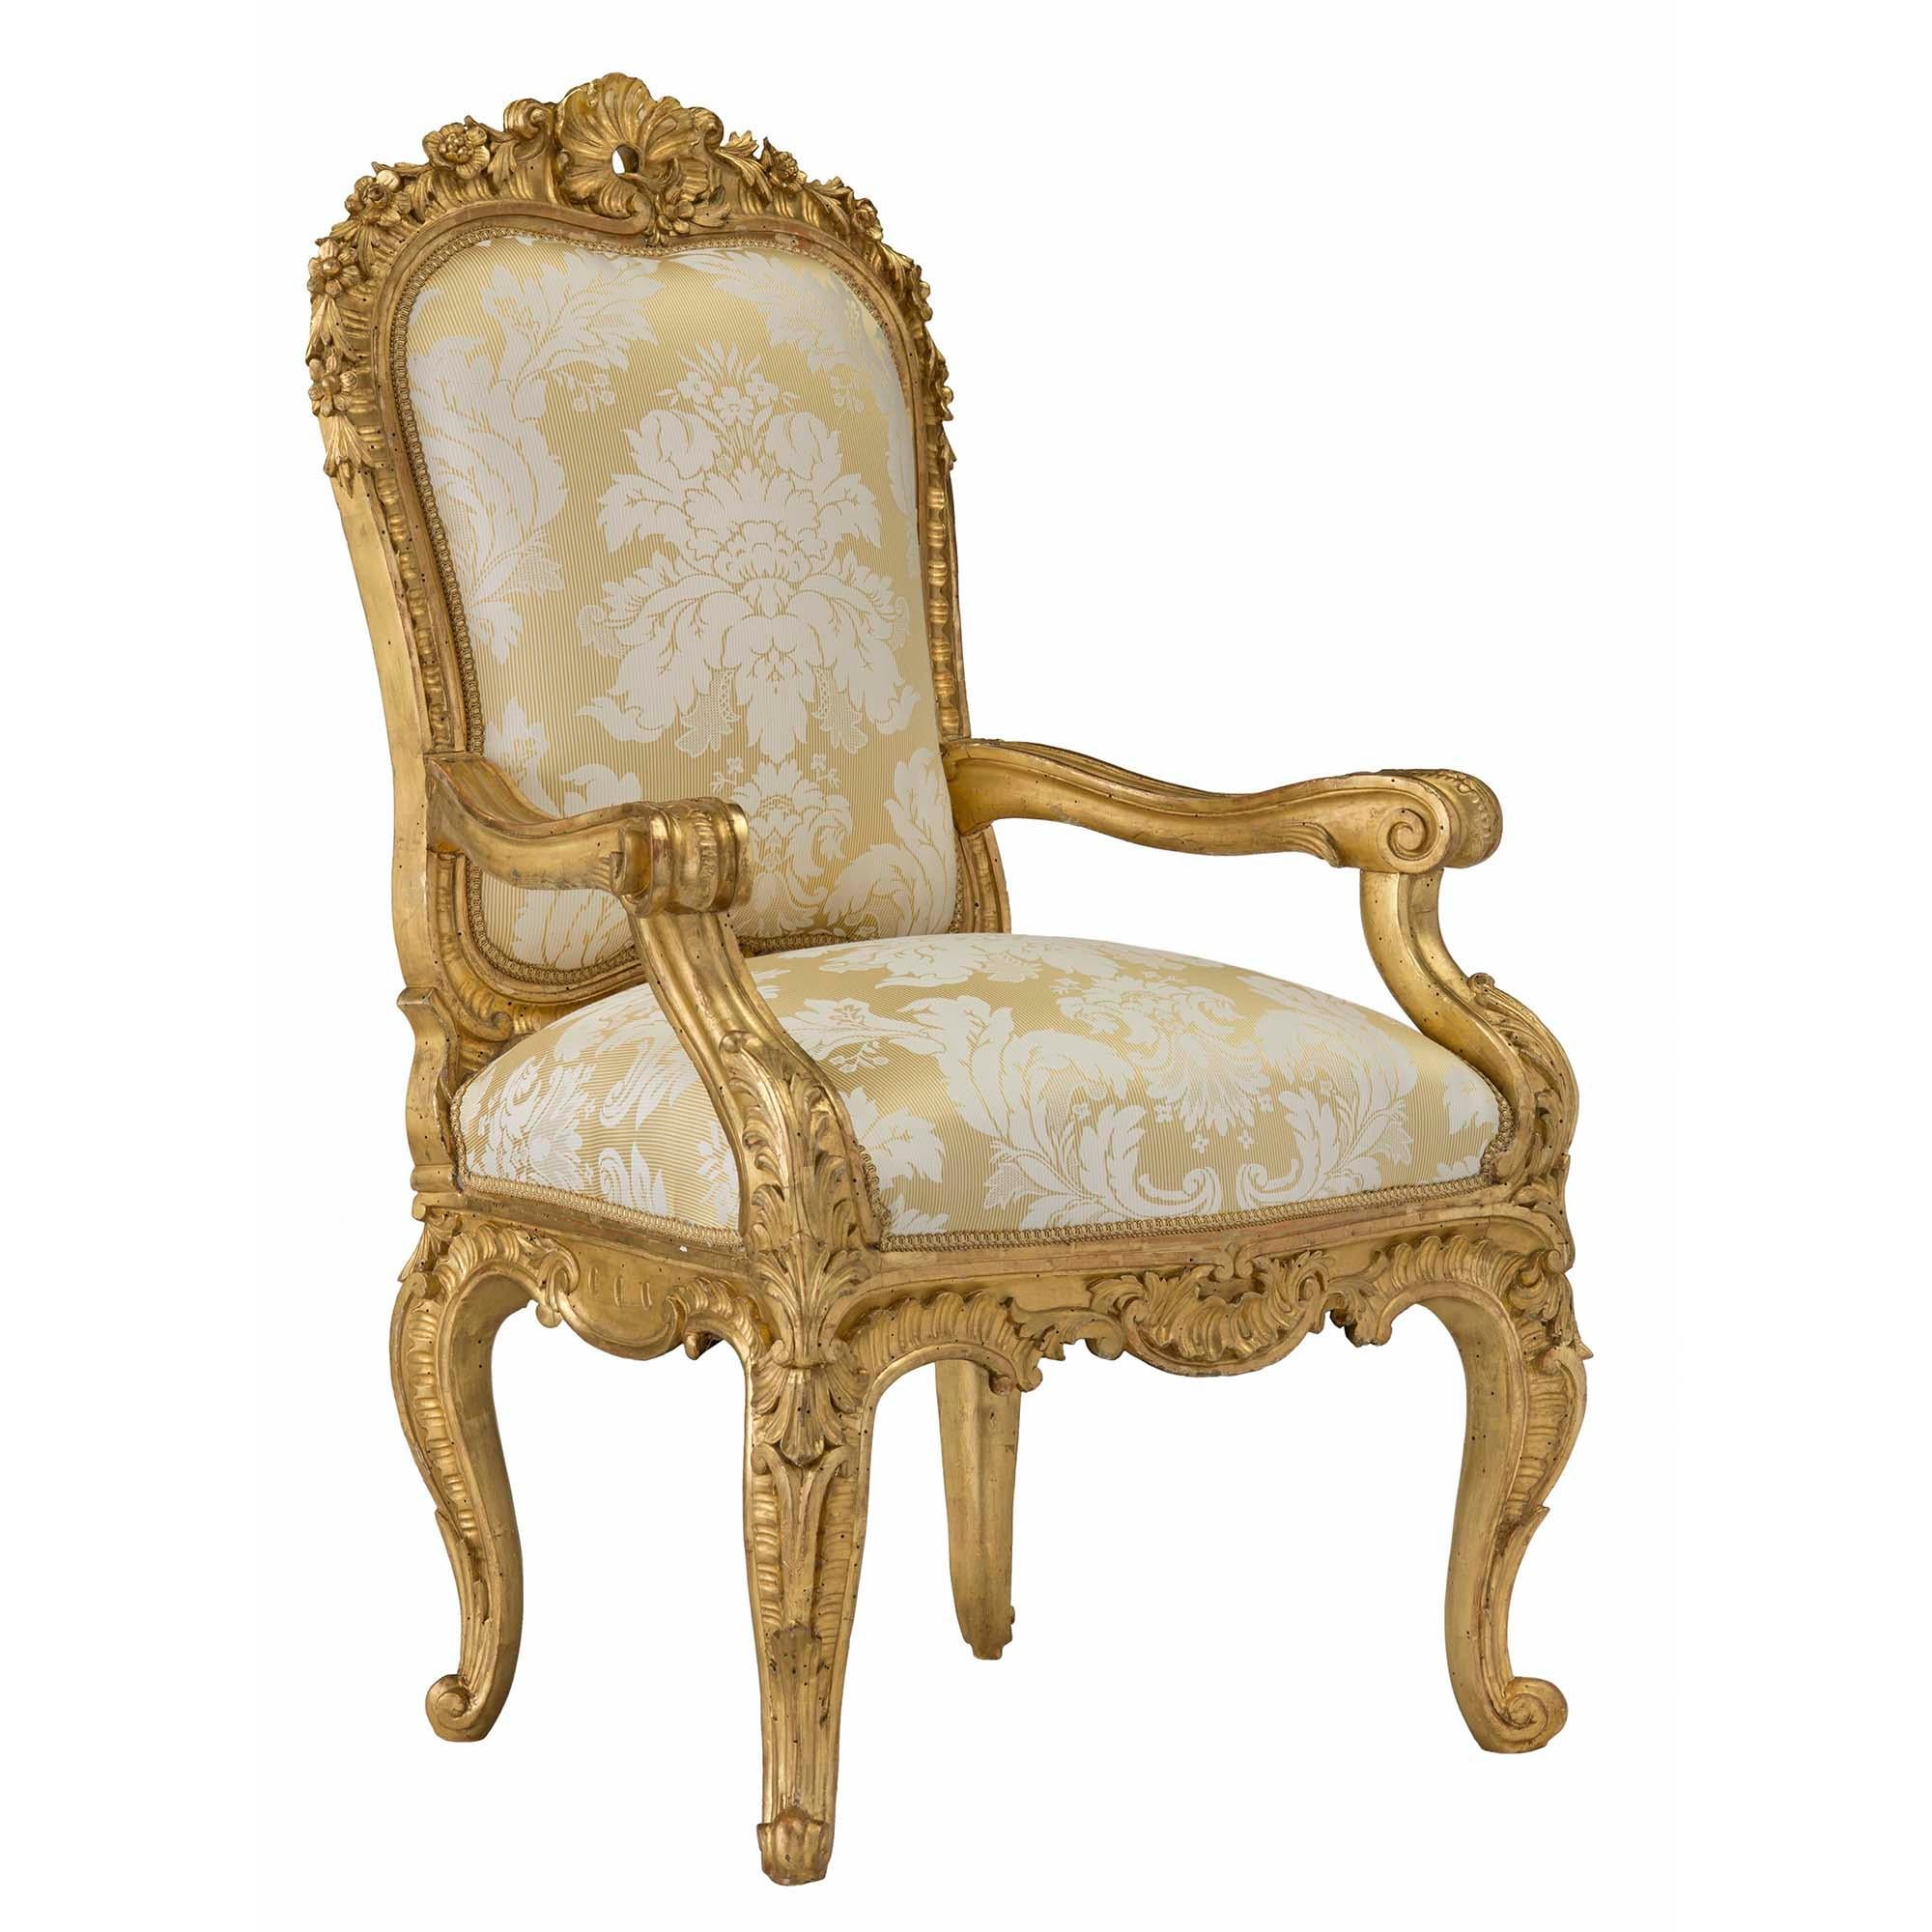 A pair of magnificent and high quality Italian 18th century Louis XV period Roman giltwood throne armchairs. Each finely carved chair is raised on cabriole legs accented with large acanthus leaves. The scrolled frieze is decorated with a large